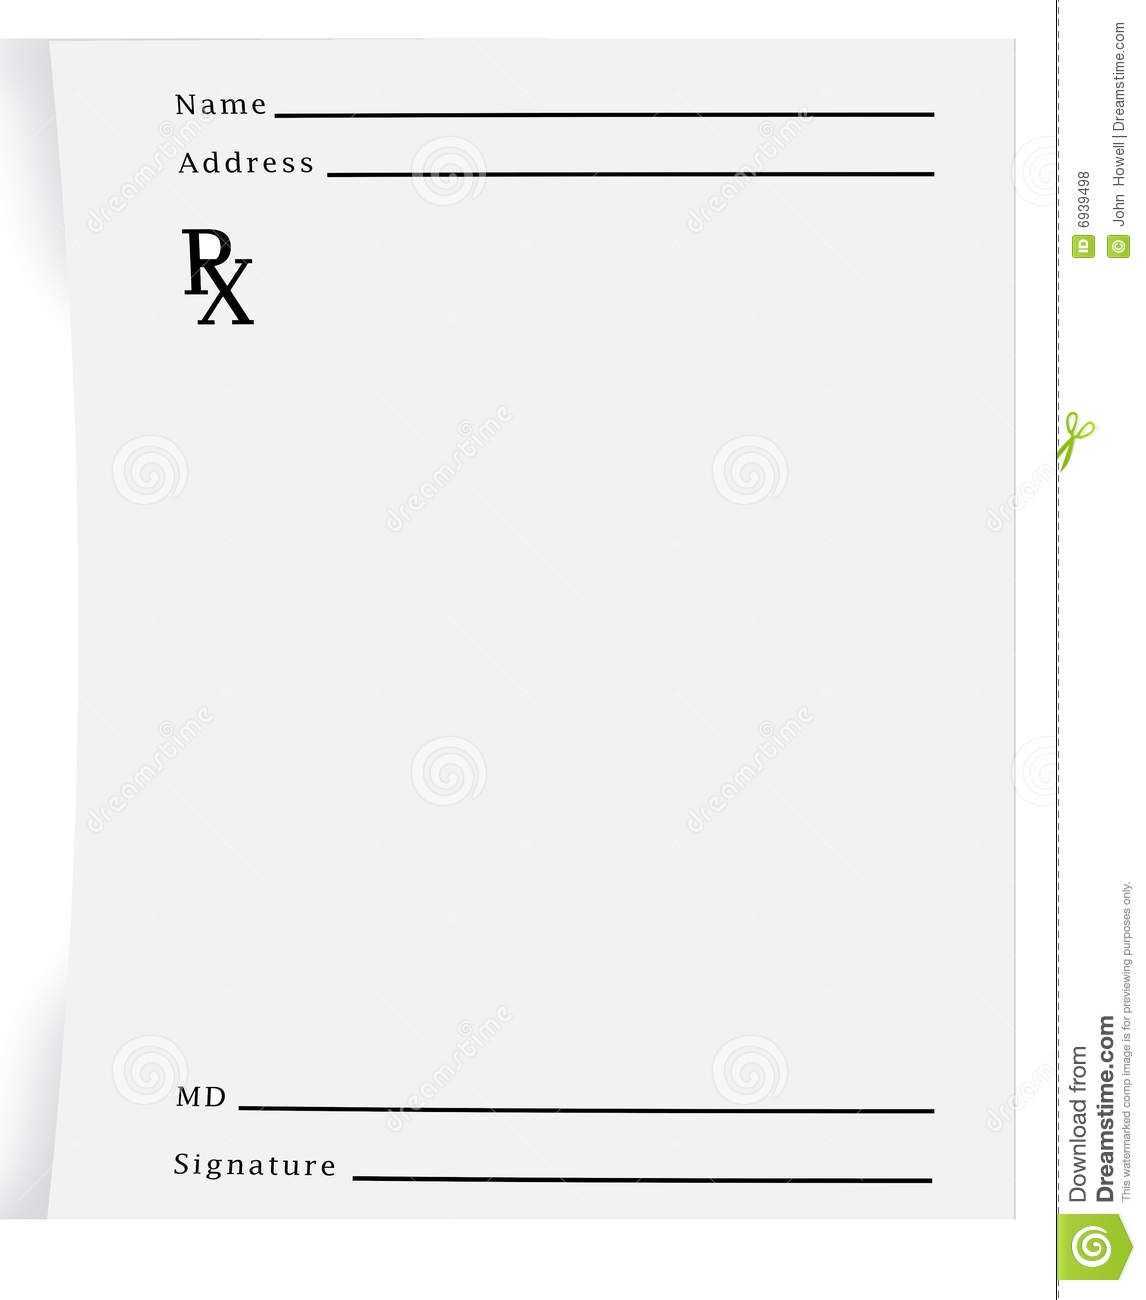 019 Template Ideas Prescription Pad Blank Download From Over Throughout Blank Prescription Form Template